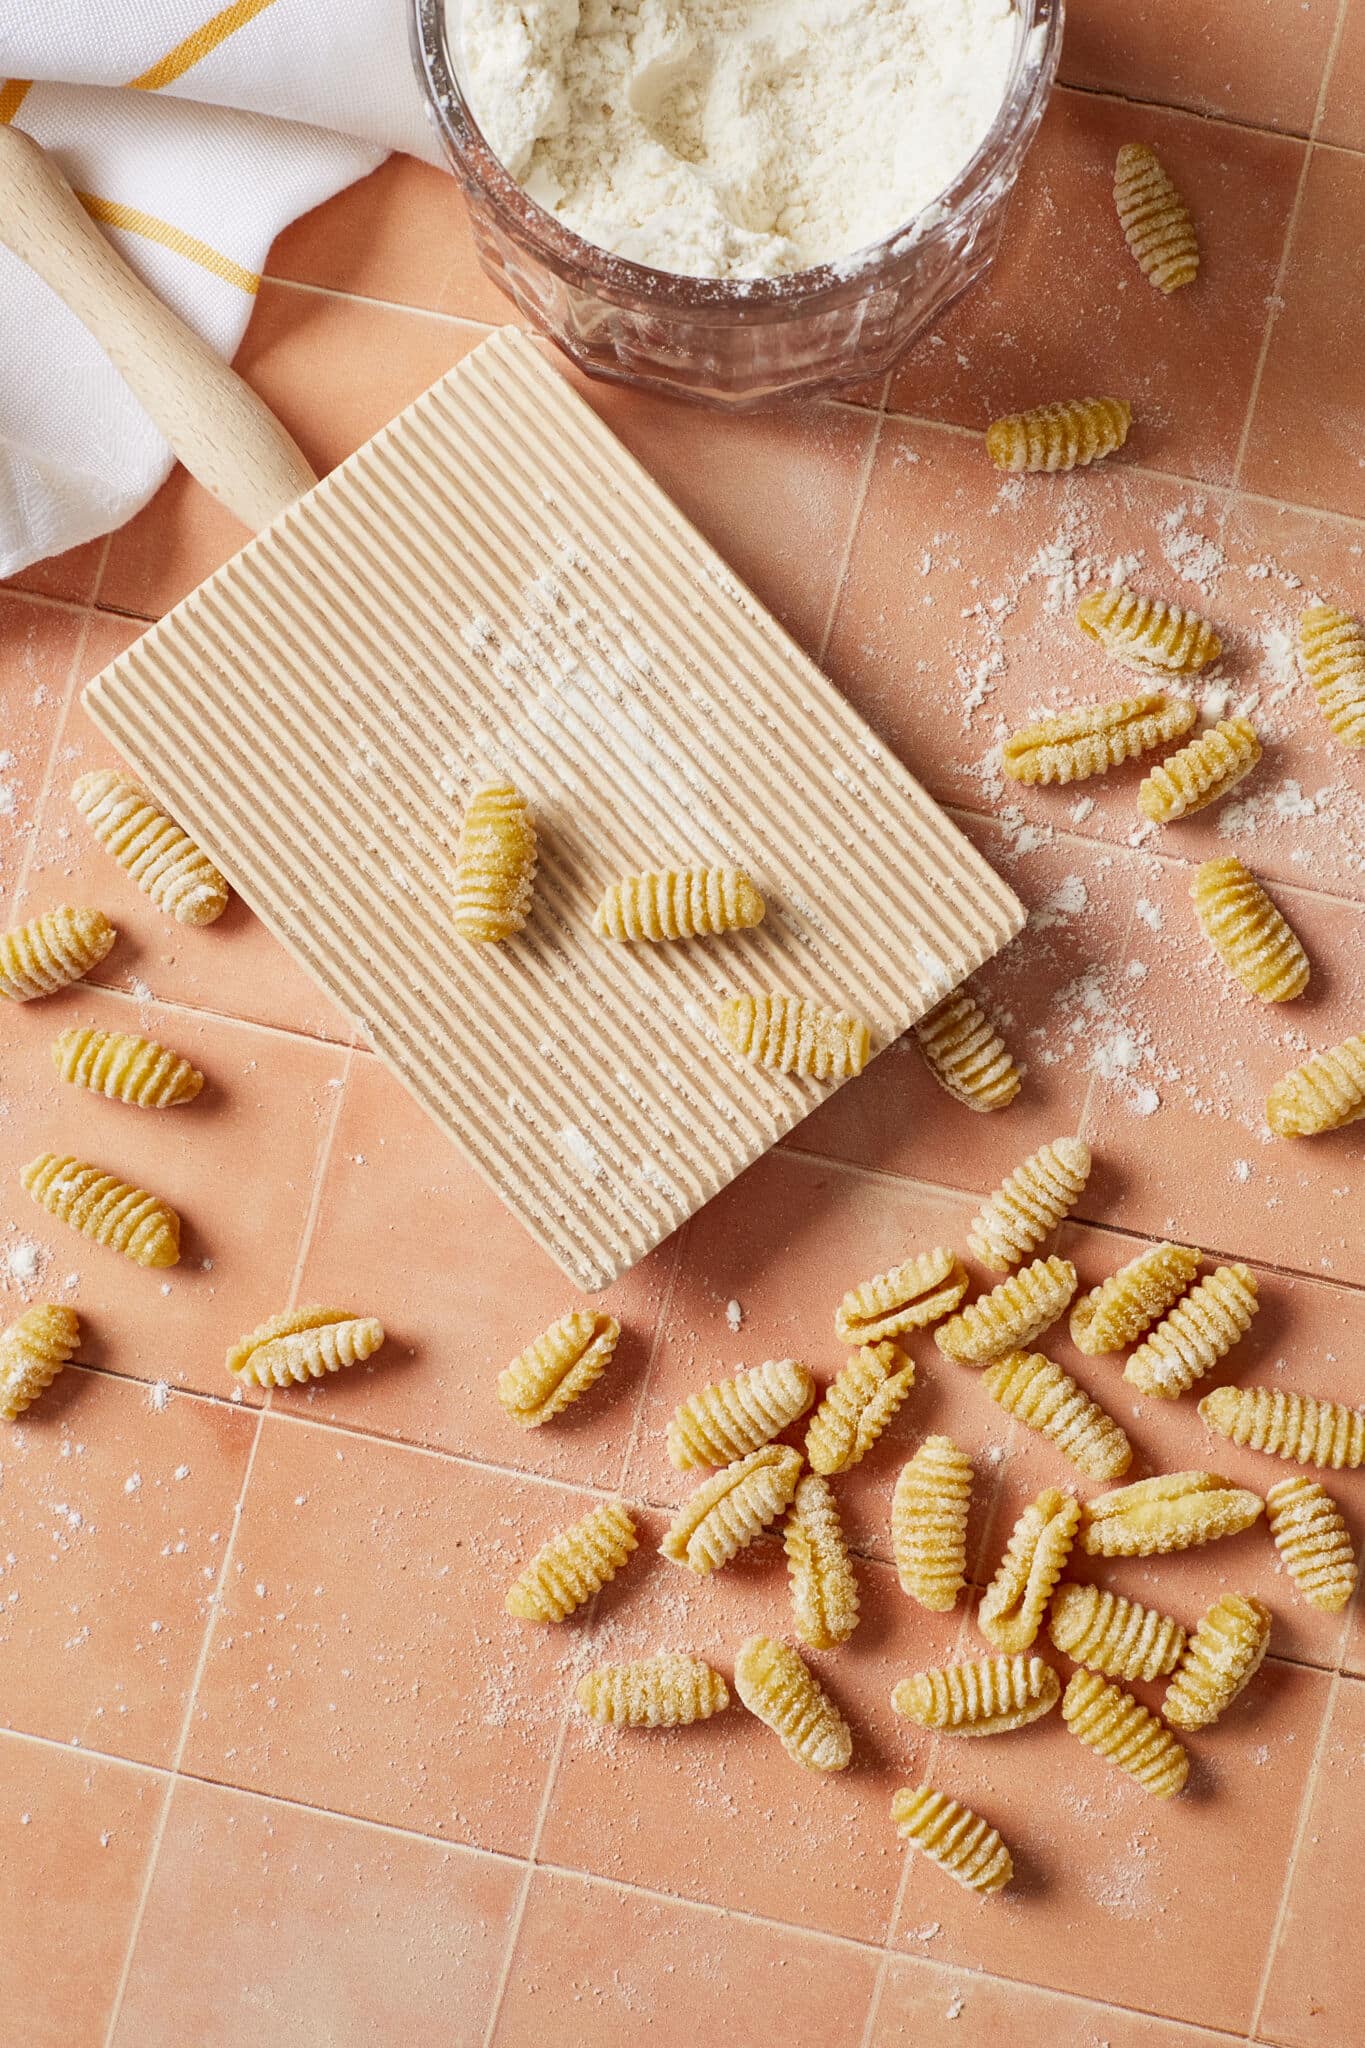 Malloreddus Pasta (Gnocchetti Sardi) is placed around a gnocchi board with 3 pieces on it. Malloreddus is shaped into small, elongated shells with a slightly curved shape. A glass bowl of flour is on the side. 